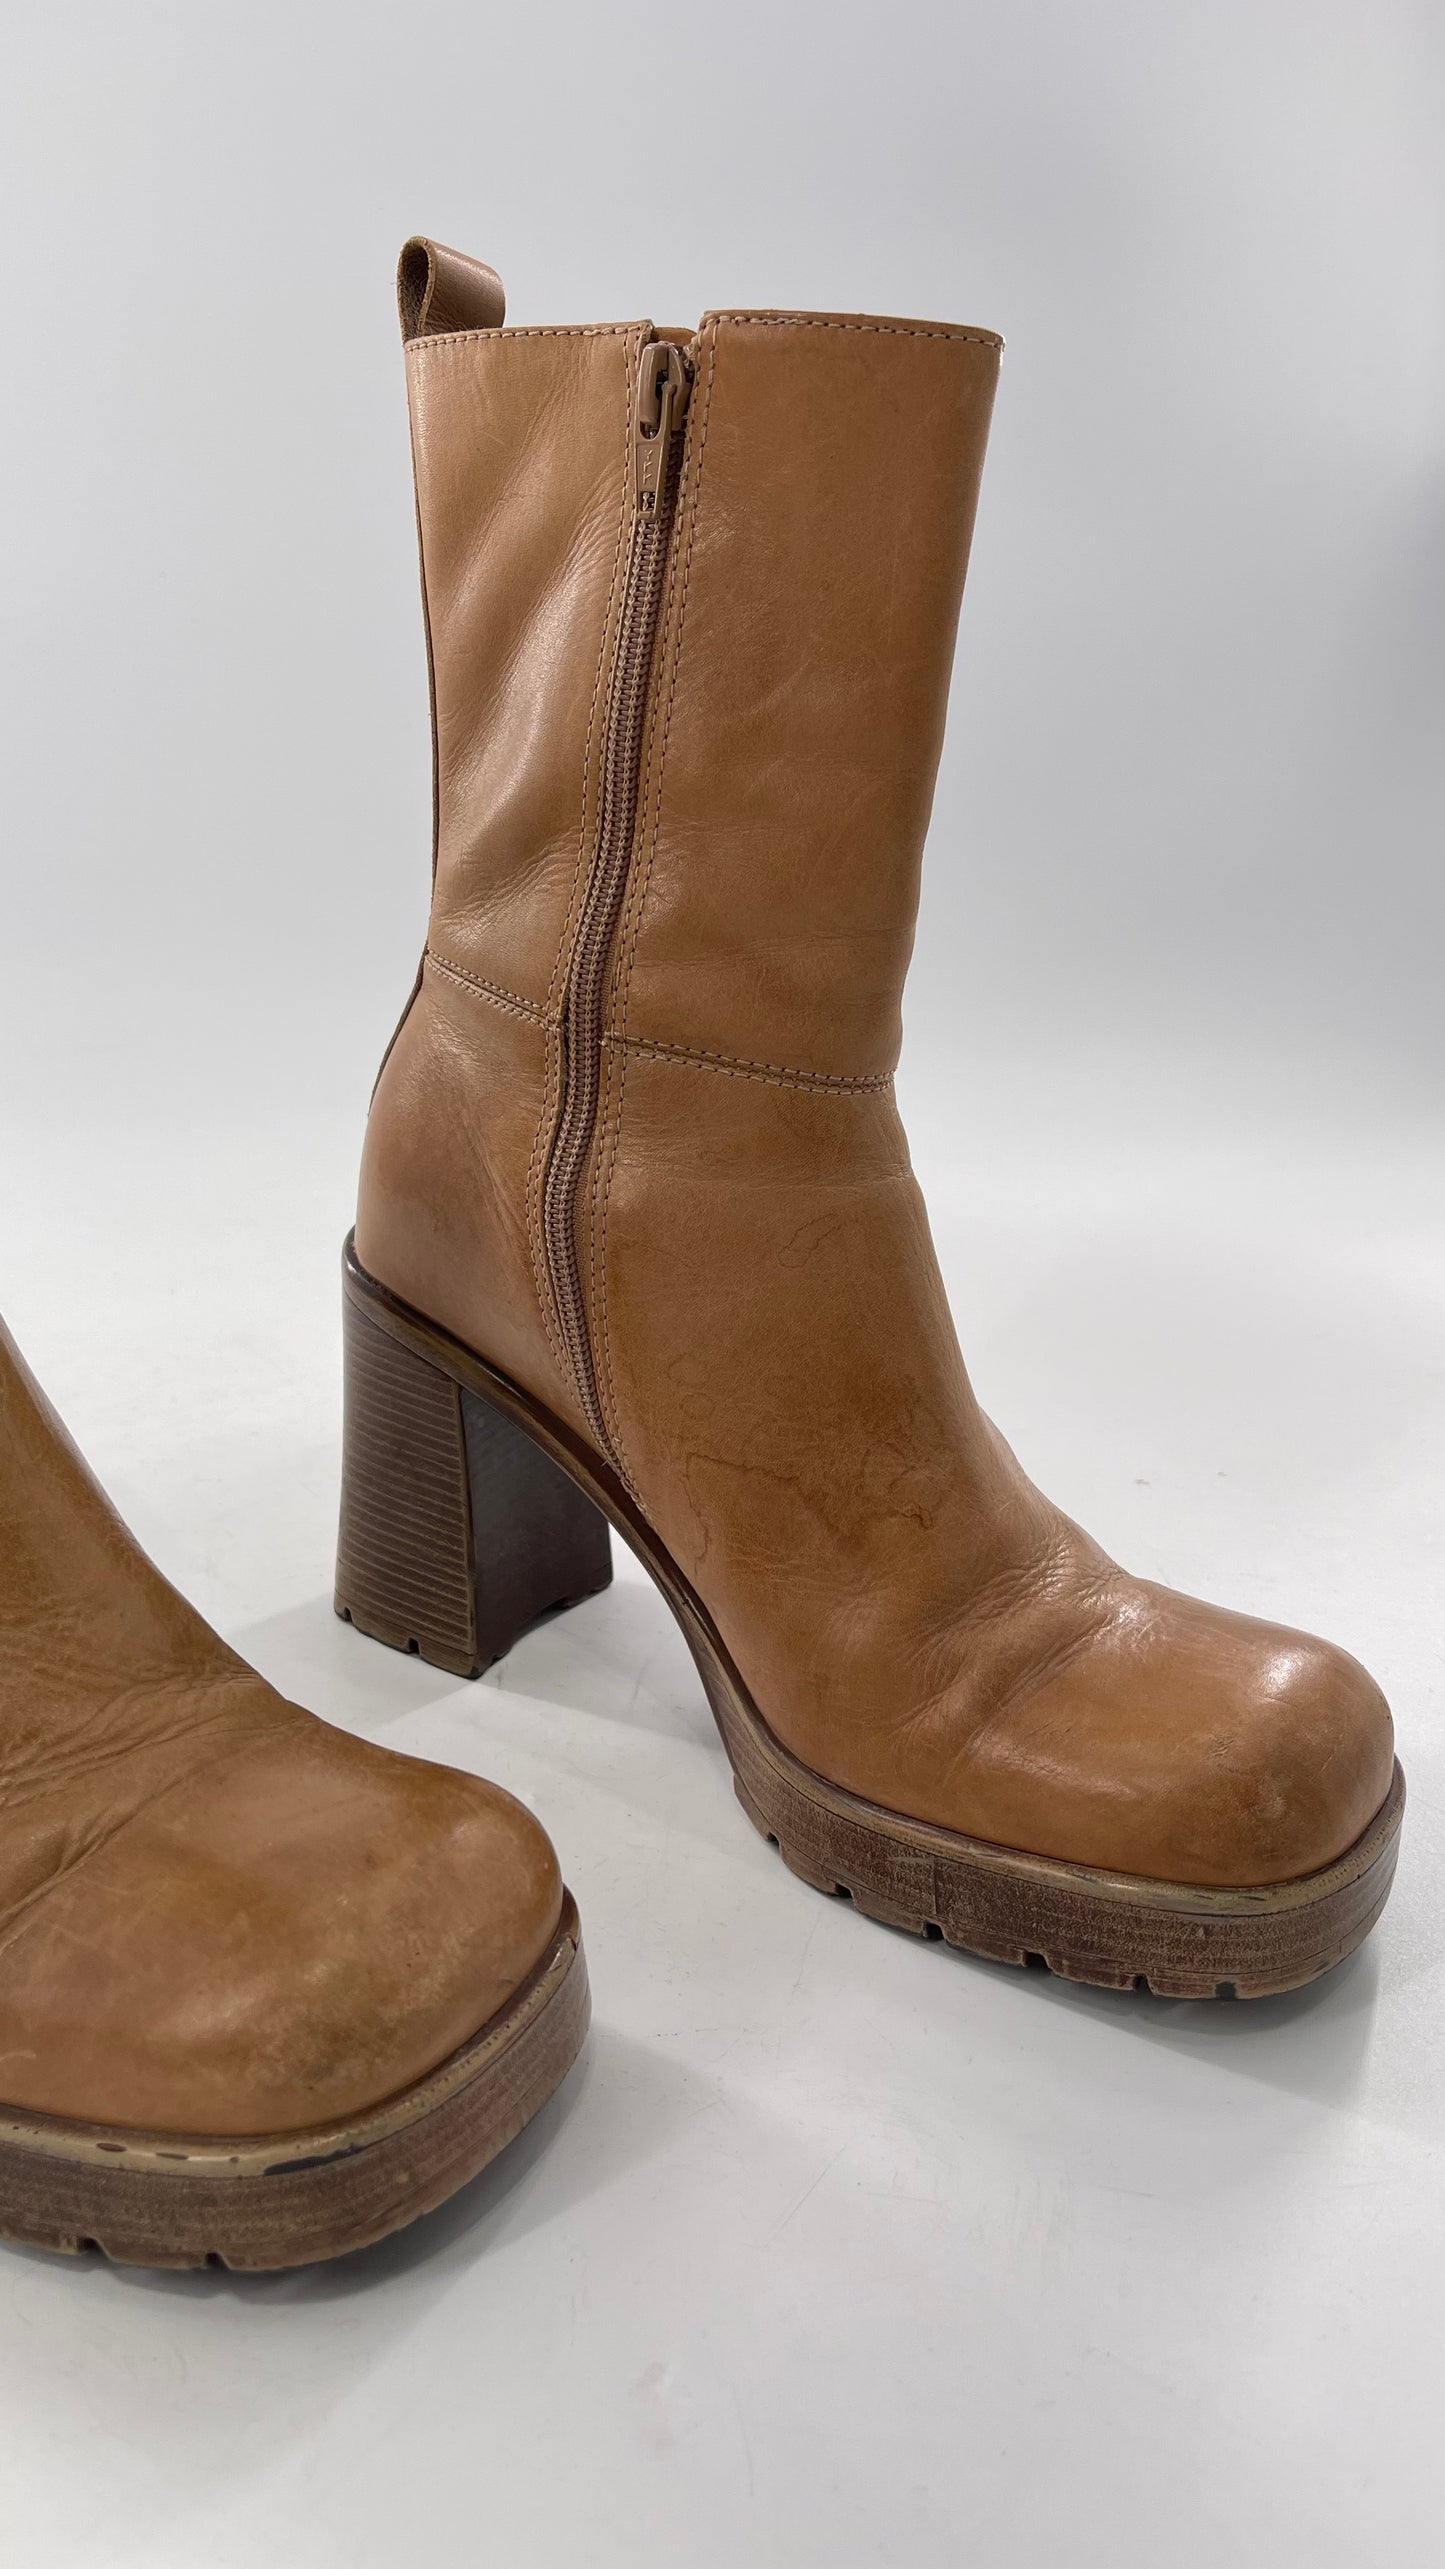 Vintage 90s Steve Madden Tan Leather Funky Square Toe Boot with Platform and Chunky Heel